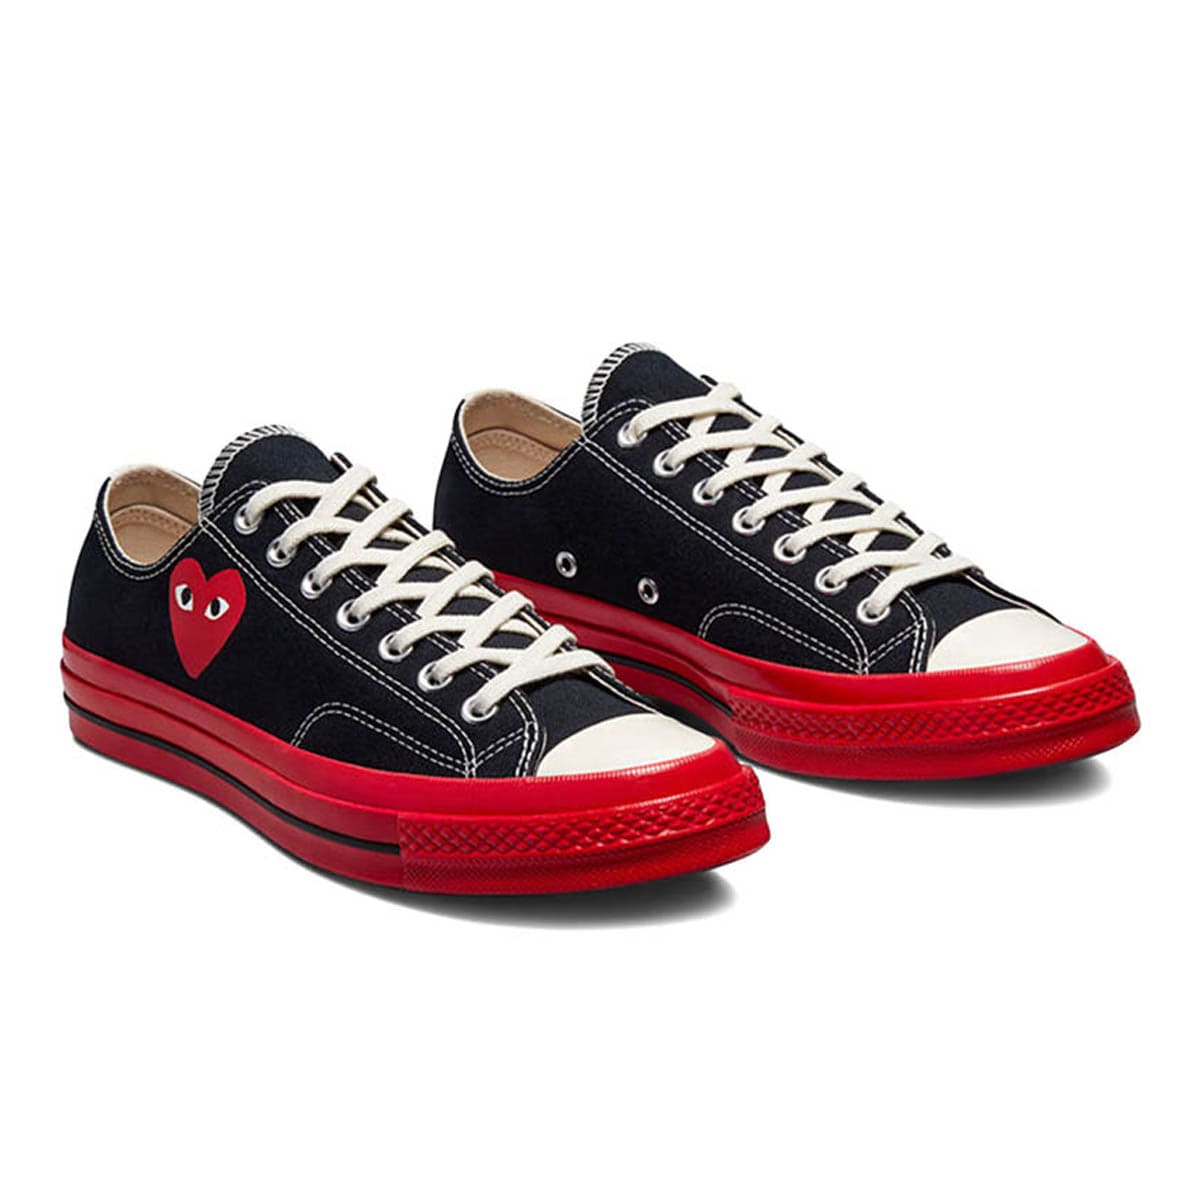 | converse one star ox bold mandarin bold mandarinfield surplus sneakersshoes | X CDG PLAY TAYLOR LOW BLACK/RED